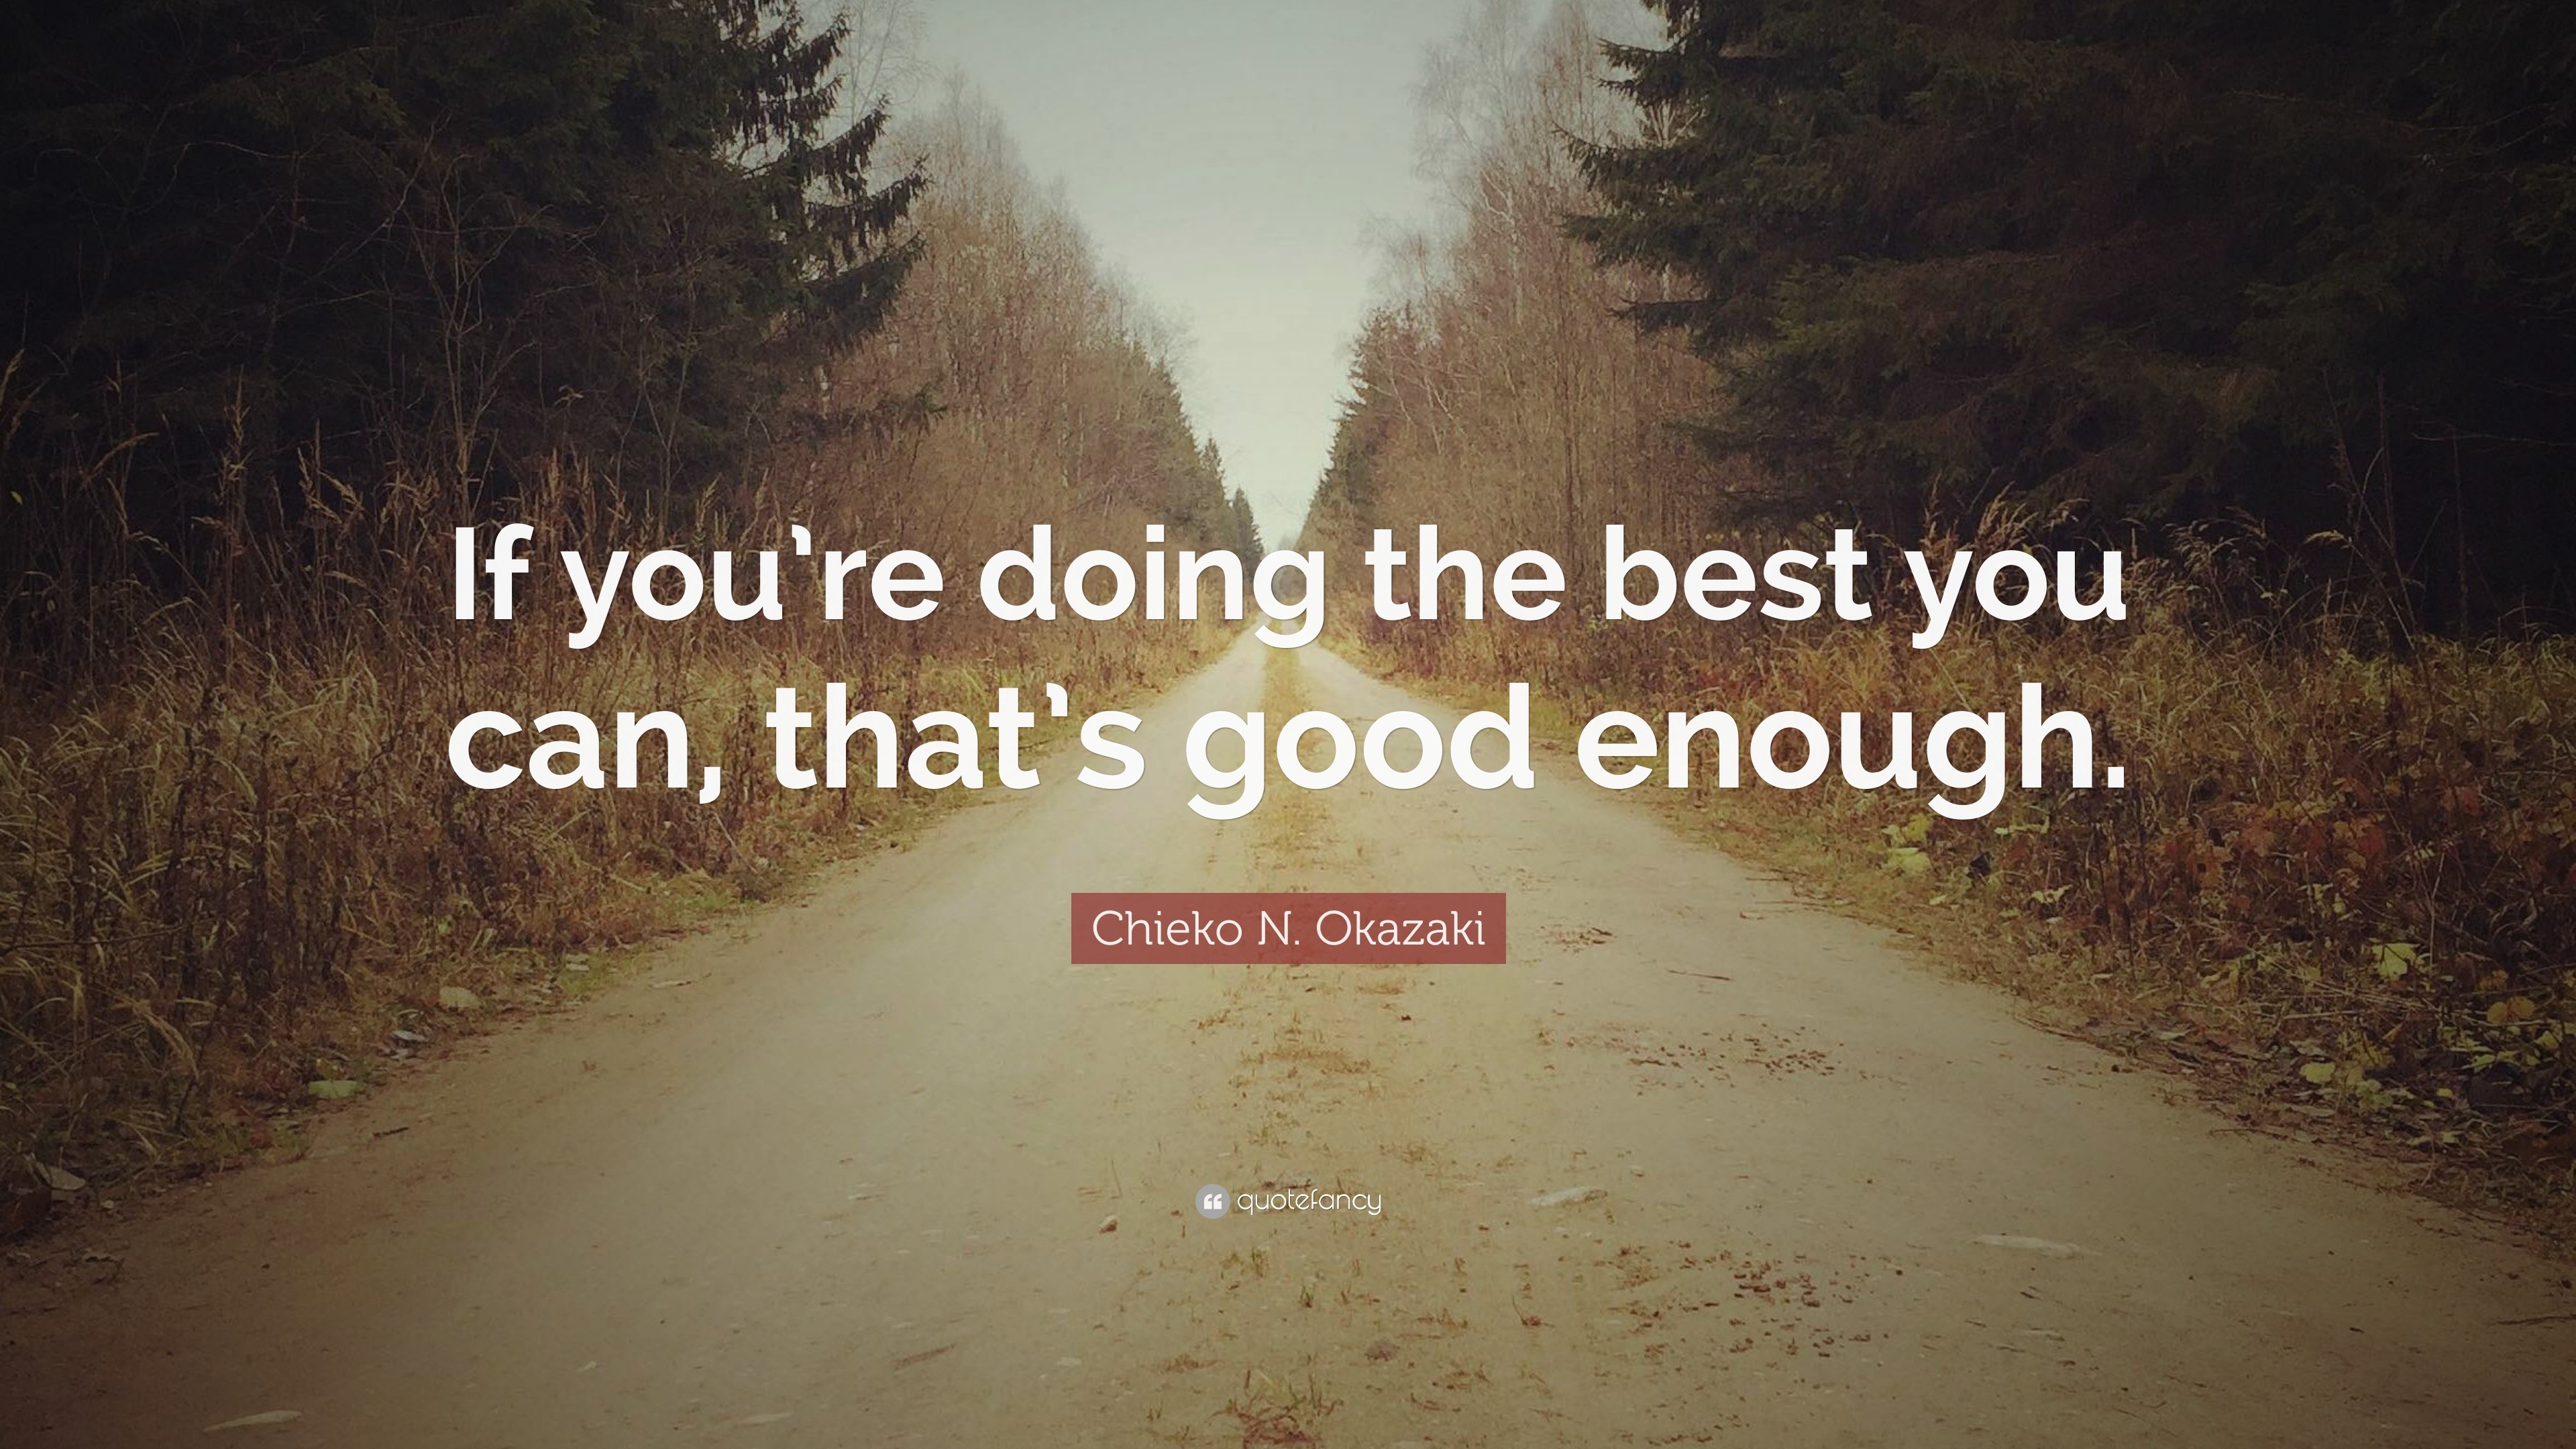 Chieko N. Okazaki Quote “If you’re doing the best you can, that’s good